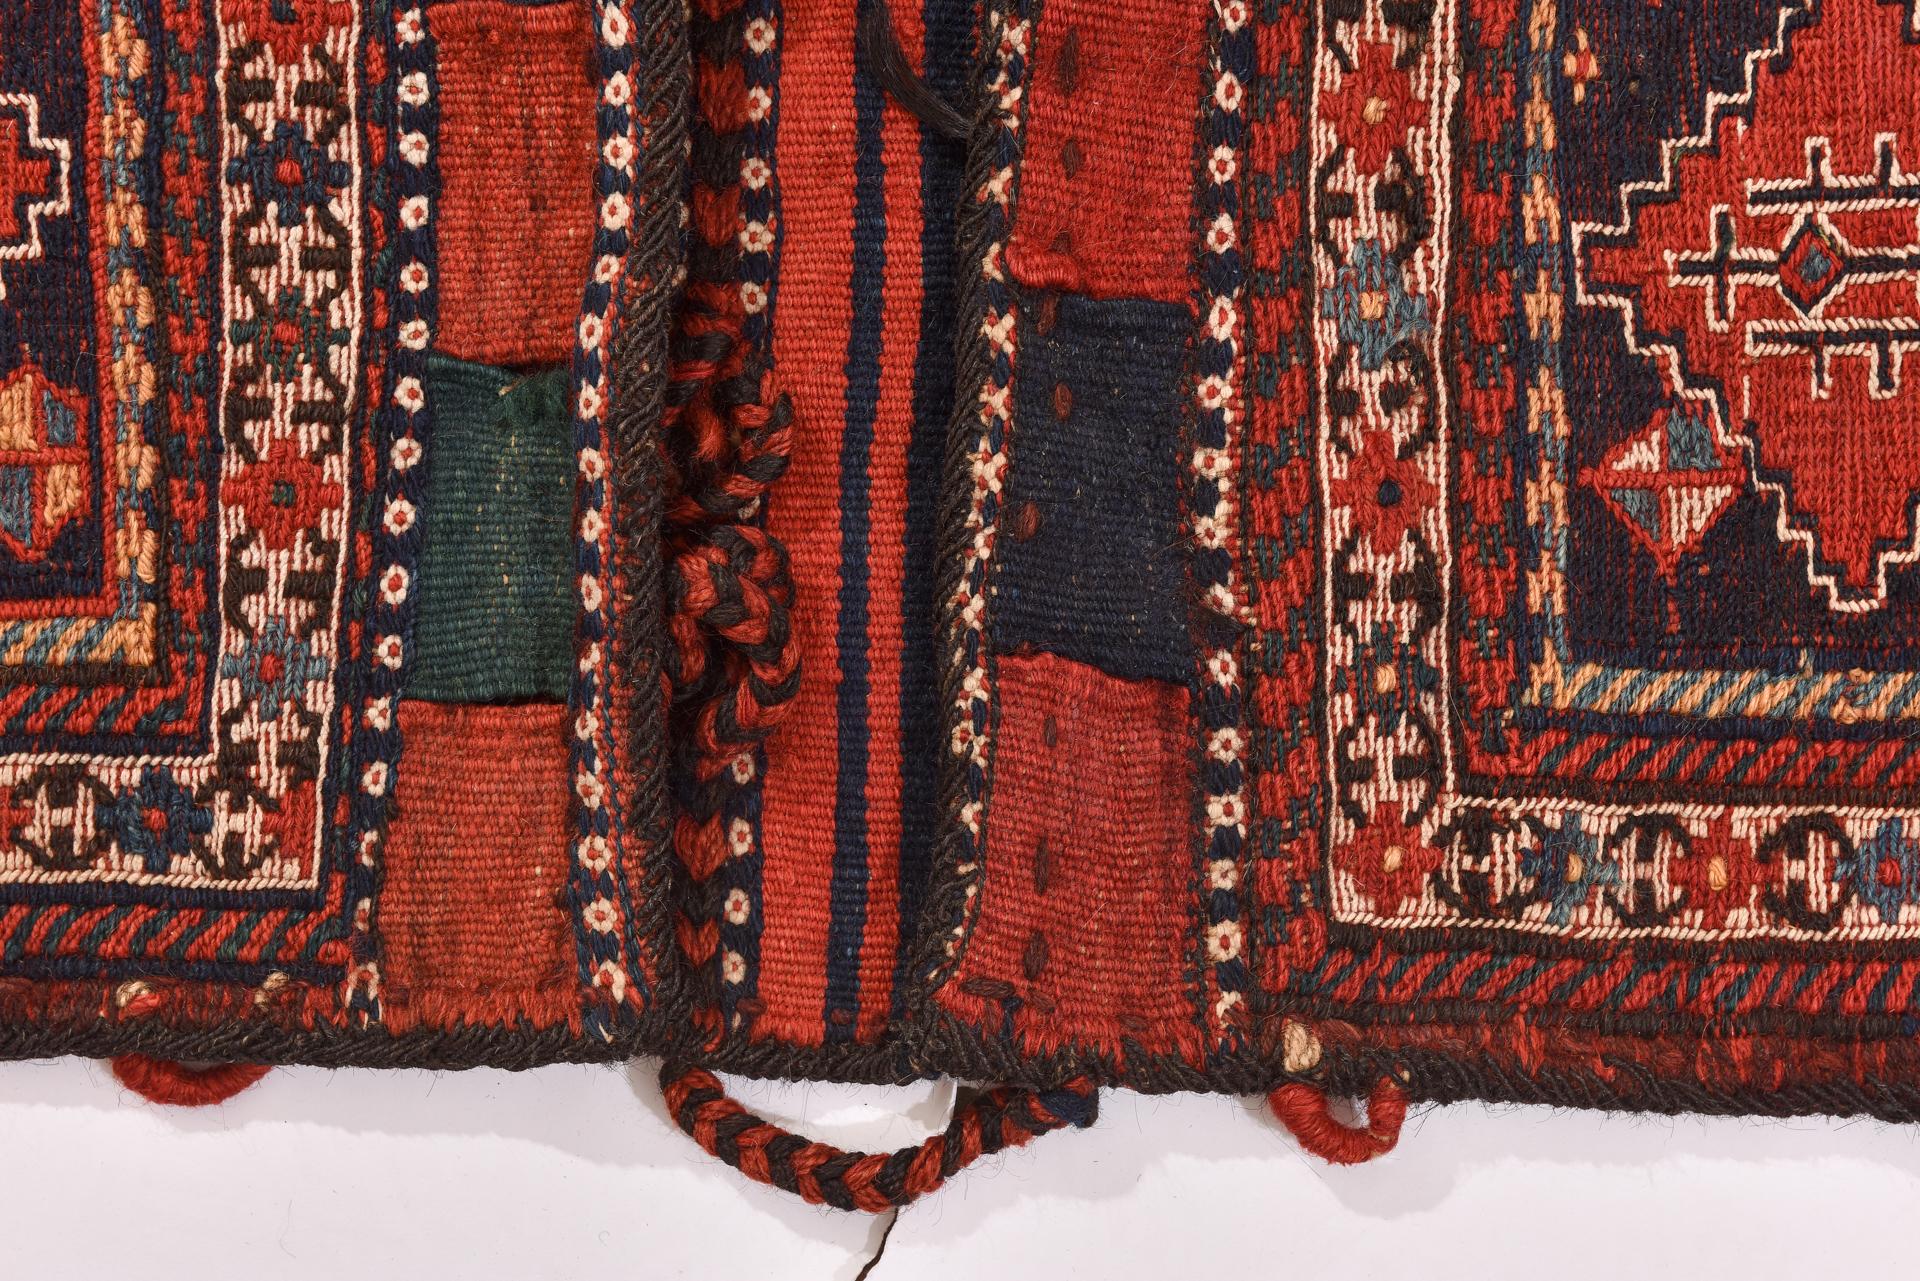 Hand-Woven Shahsavan Nomads' Antique Pouch from My Private Collection For Sale